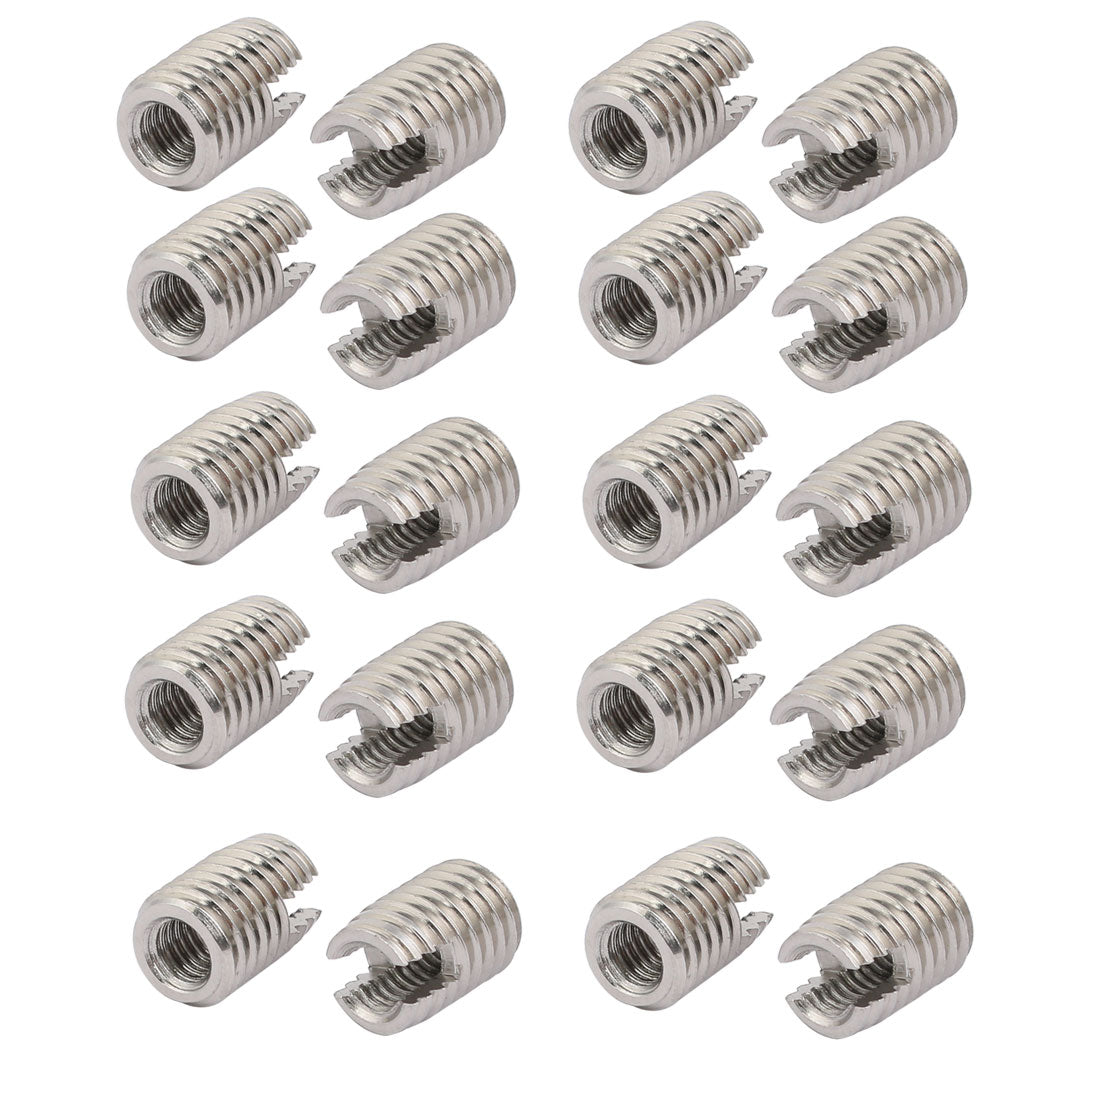 uxcell Uxcell M6x14mm 304 Stainless Steel Self Tapping Slotted Thread Insert 20pcs